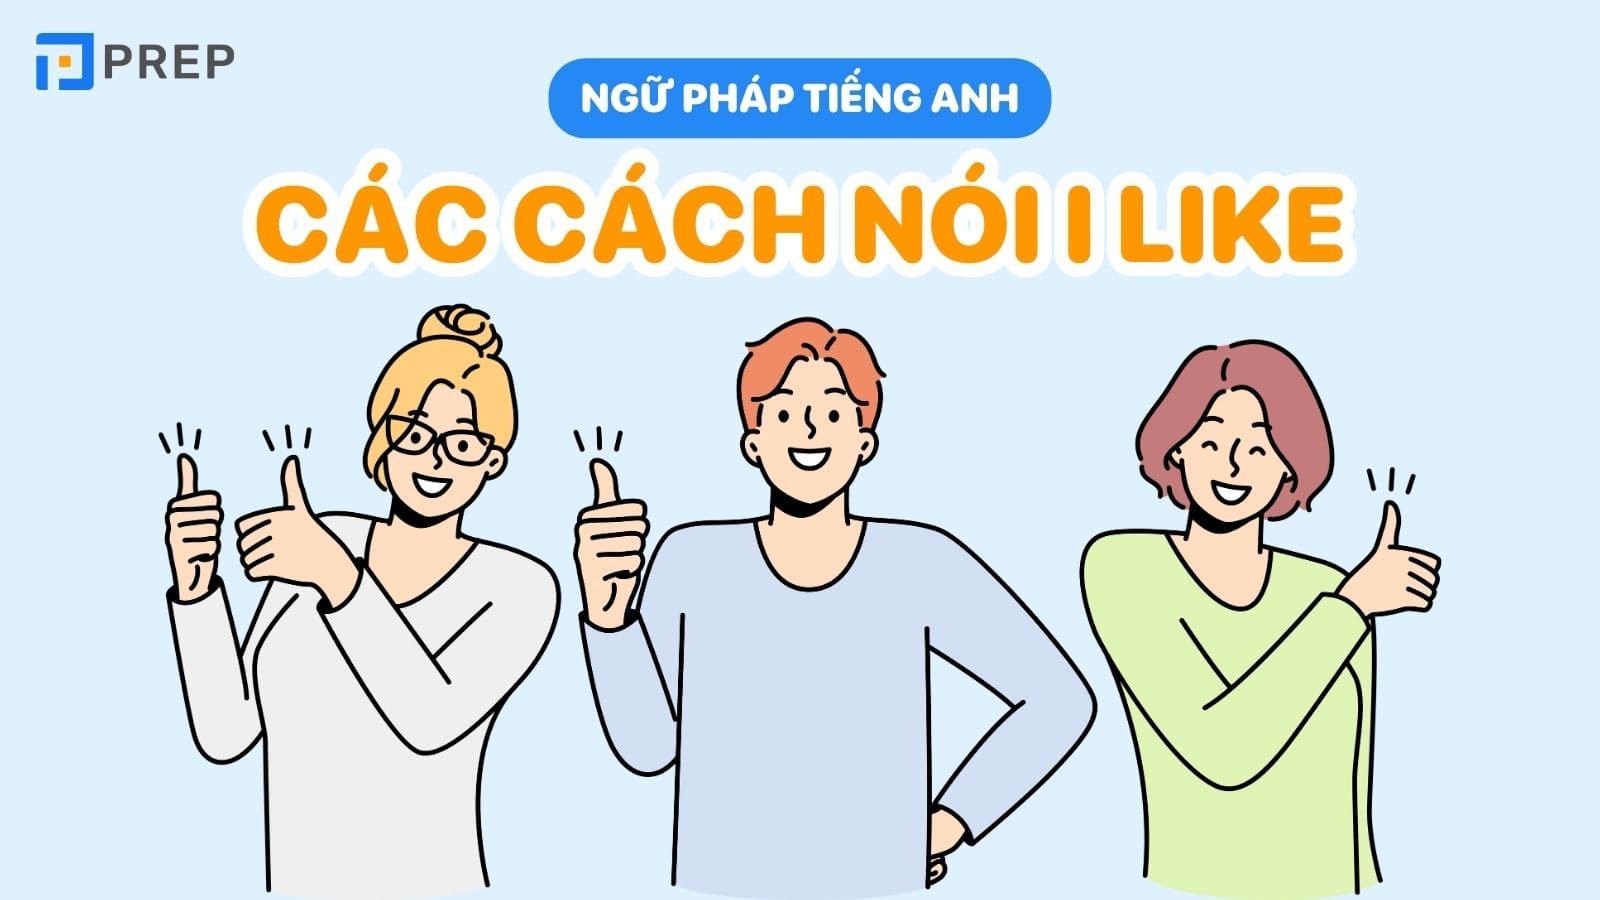 cac-cach-noi-i-like-thich-trong-tieng-anh.jpg